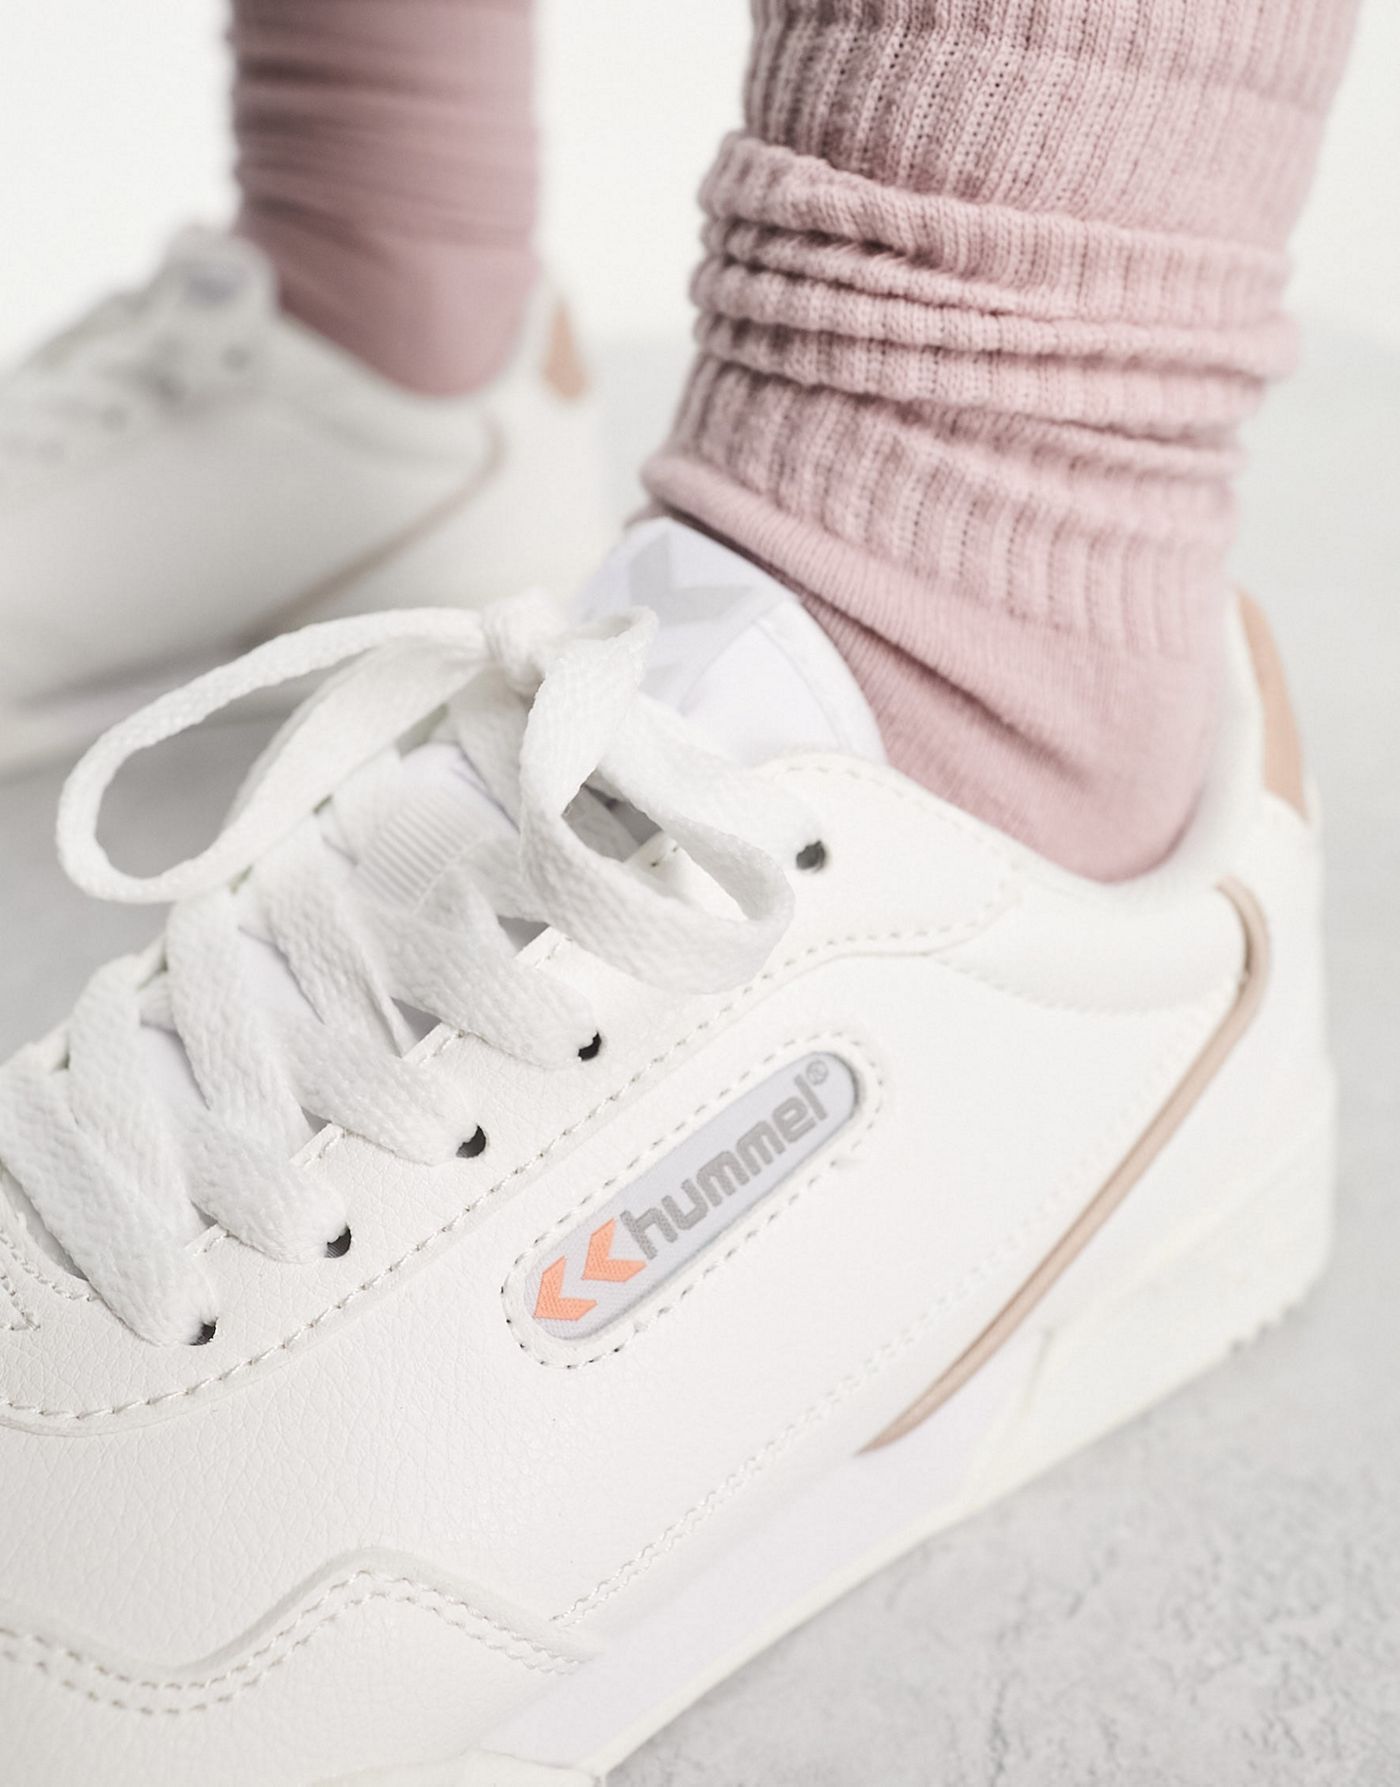 Hummel Forli trainers in white and rose